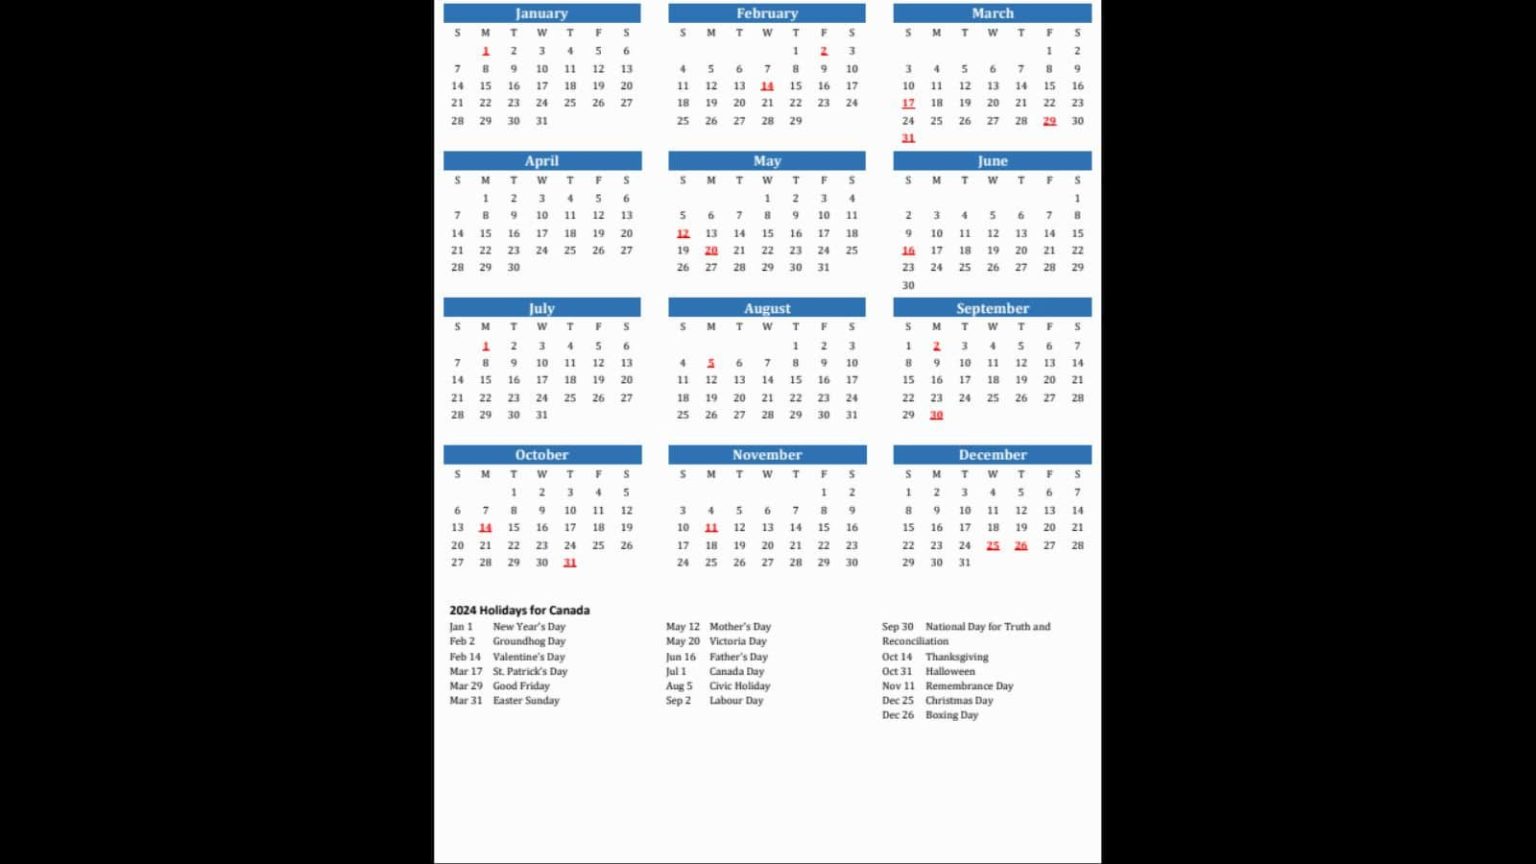 List of Canadian Statutory Holidays for 2024 Mark Your Calendars